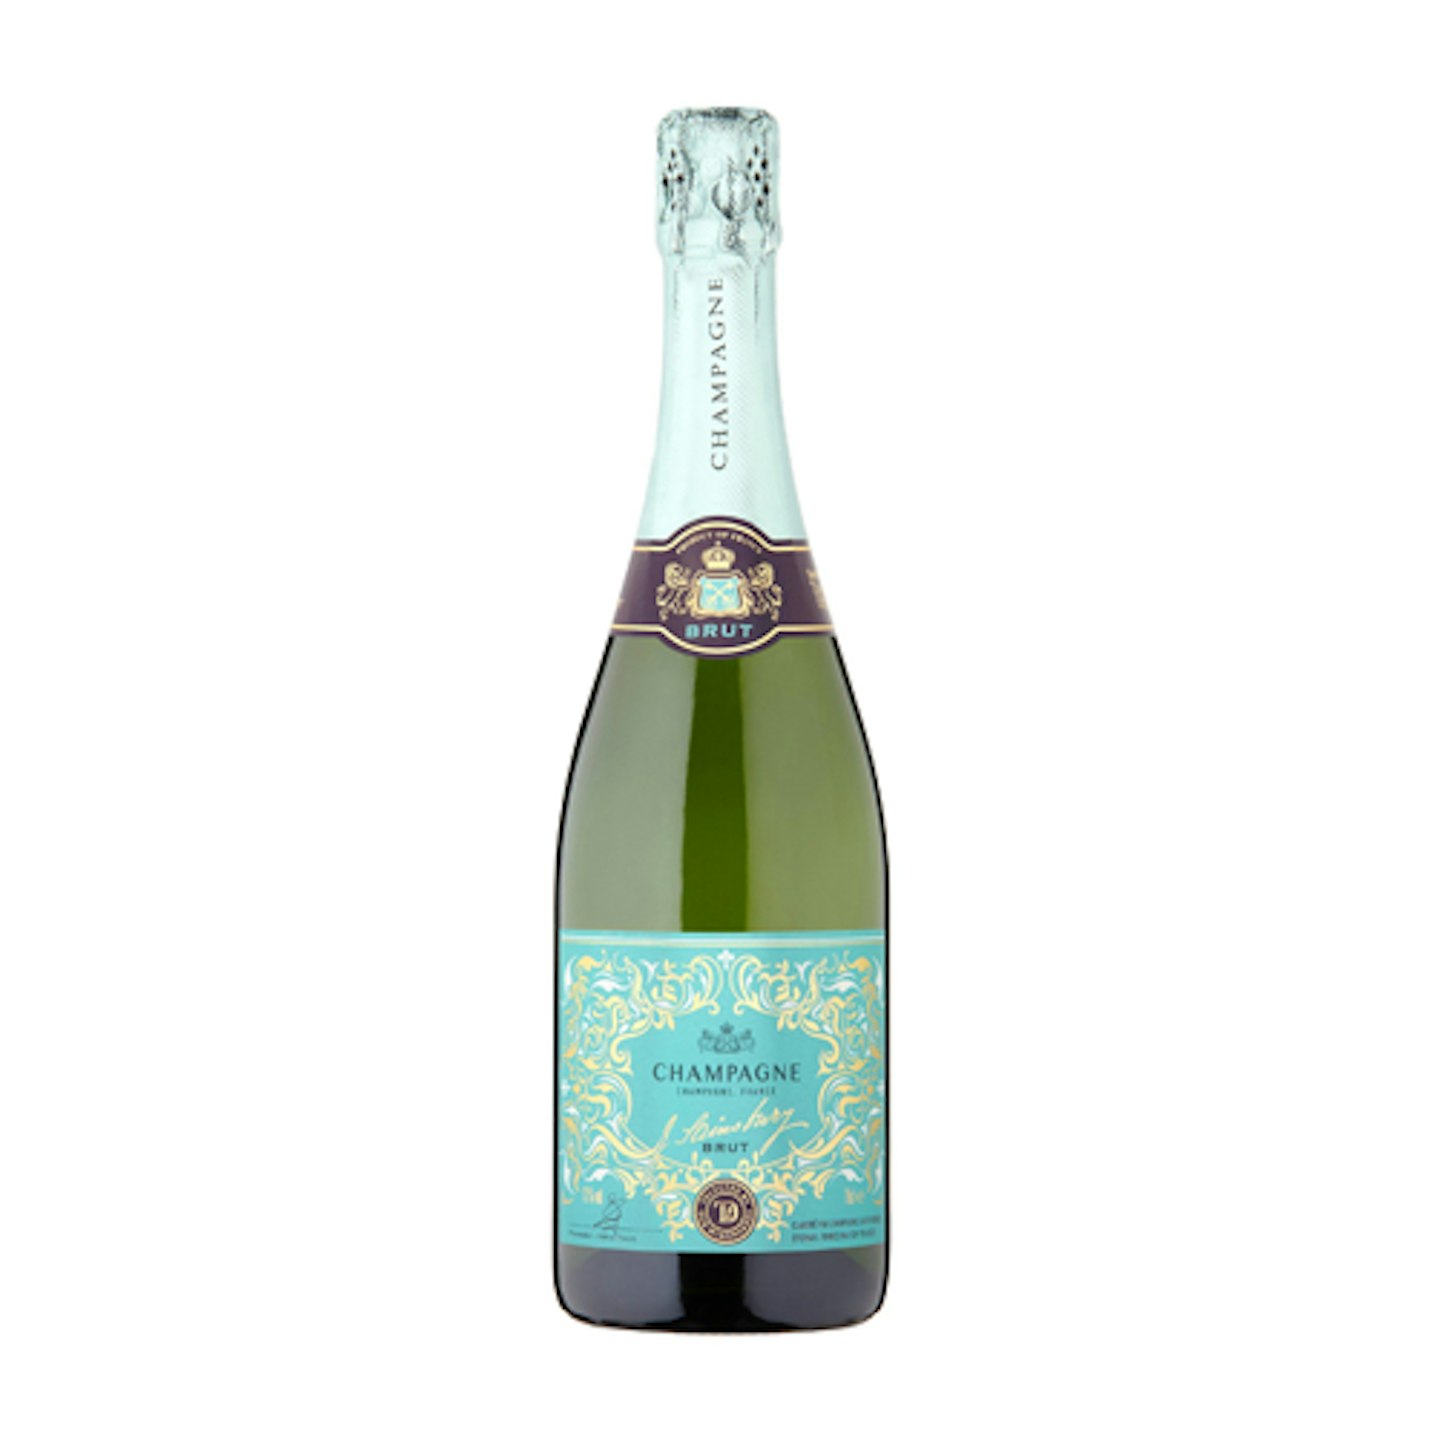 Sainsburyu0026#039;s Brut Non Vintage Champagne, Taste the Difference 75cl